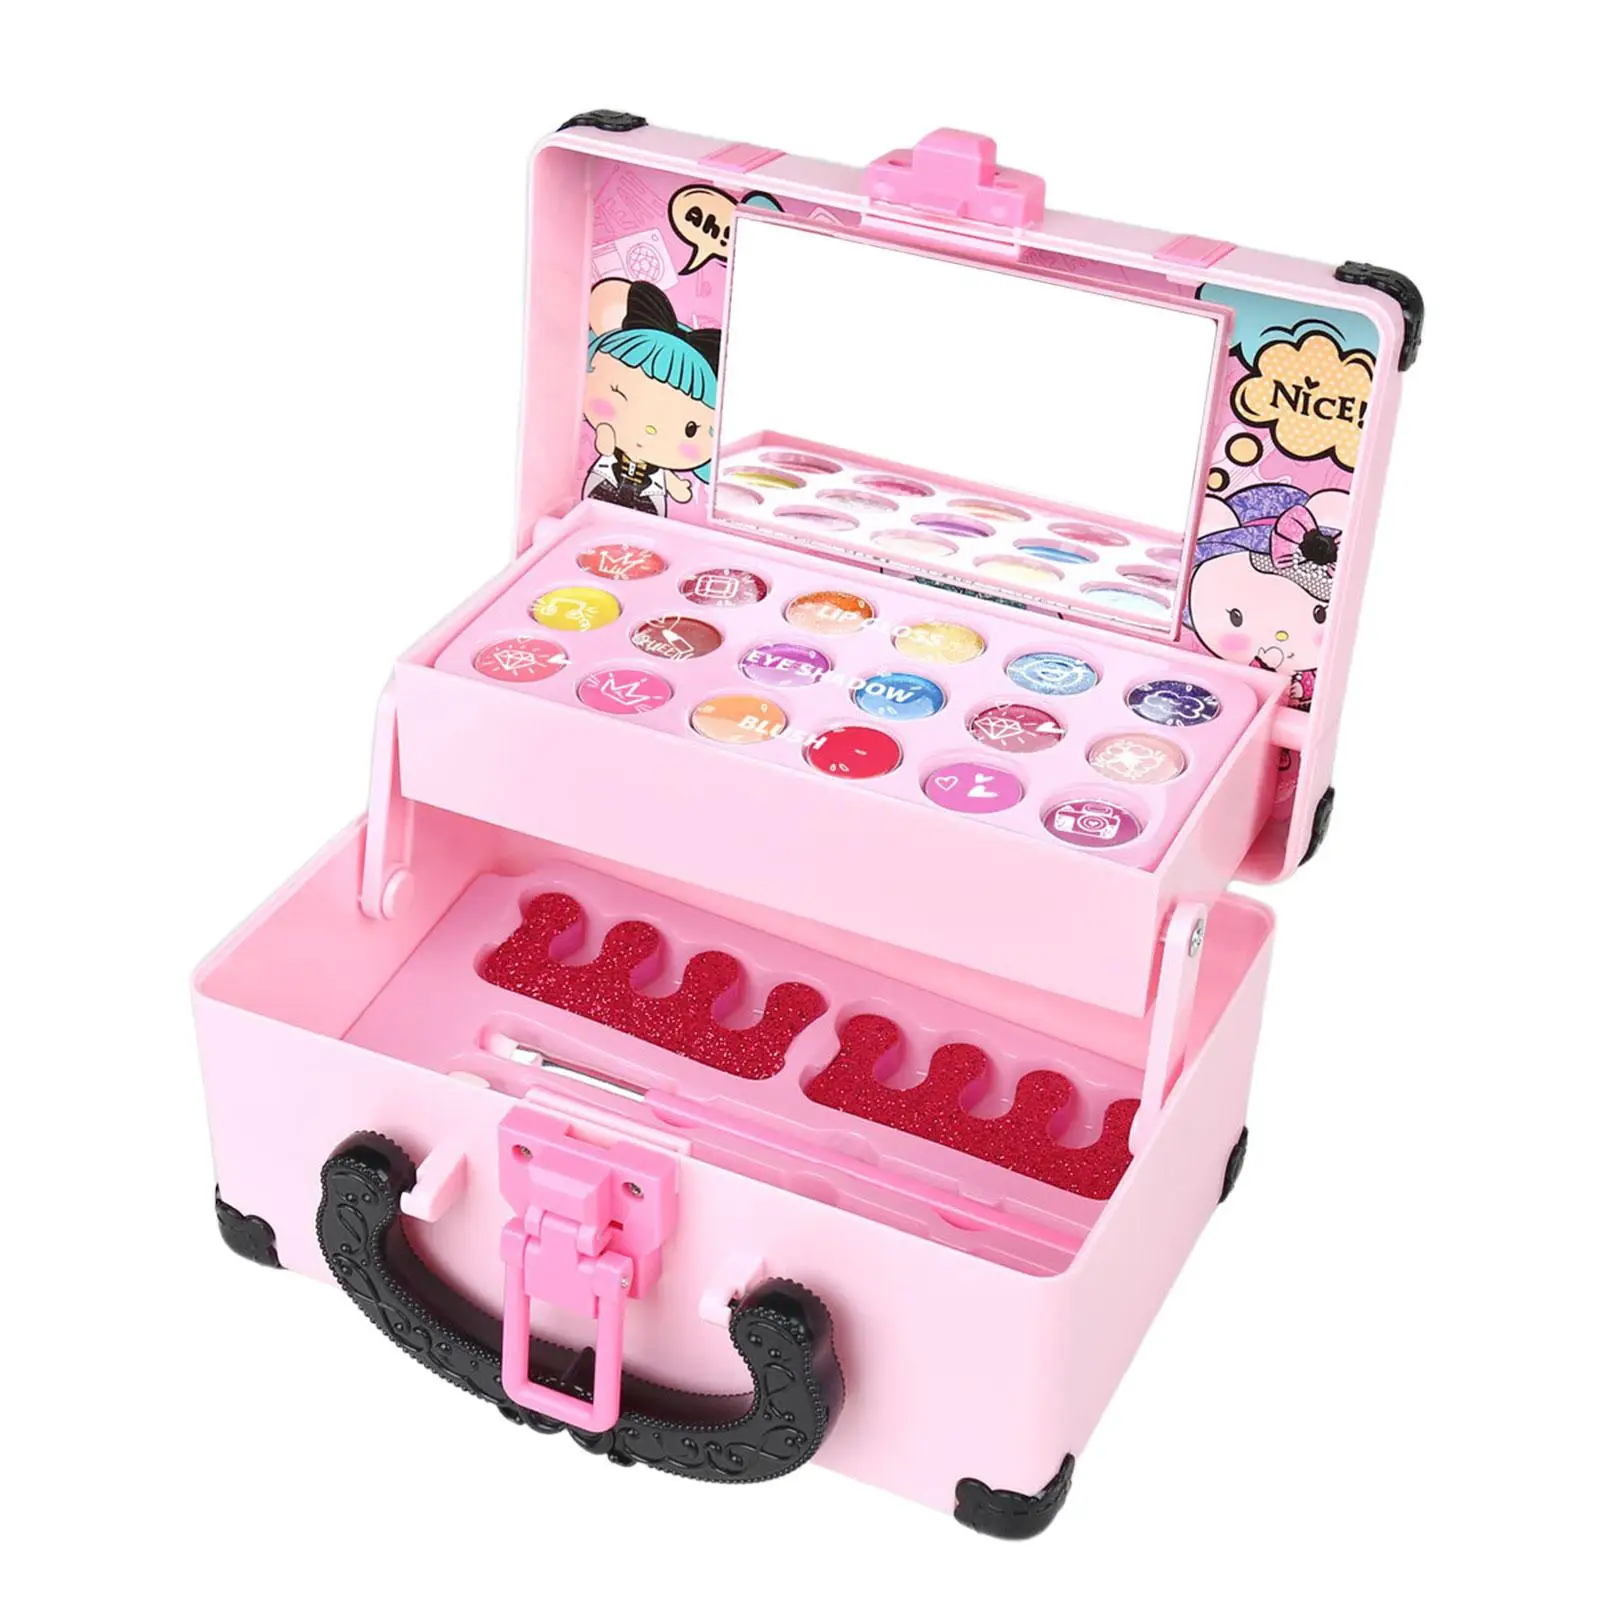 Pretend Play Makeup Toy Set Portable Pretend Cosmetic Makeup Accessories Children Makeup Playing Box for Girls Children Toddlers